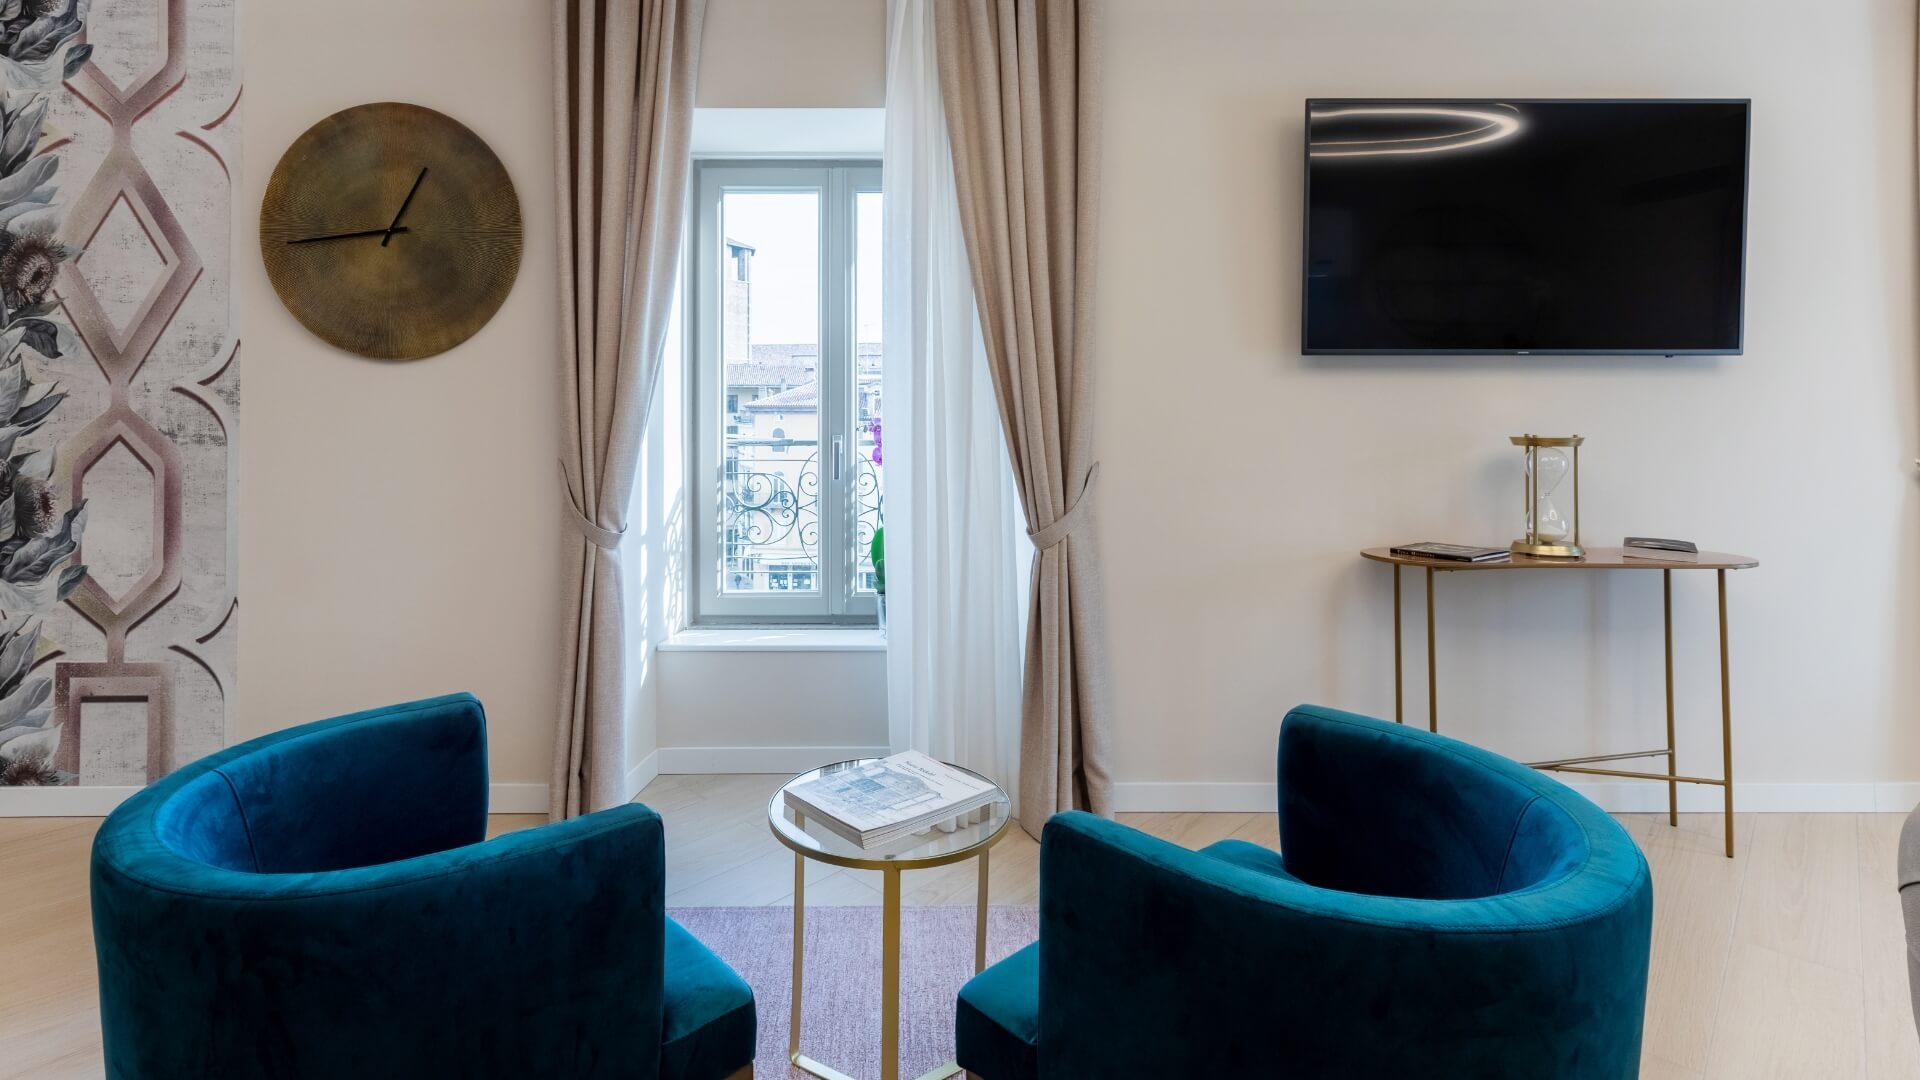 orianahomel en new-two-room-and-three-room-apartments-in-the-center-of-the-city-of-rome-turin-udine-verona 002